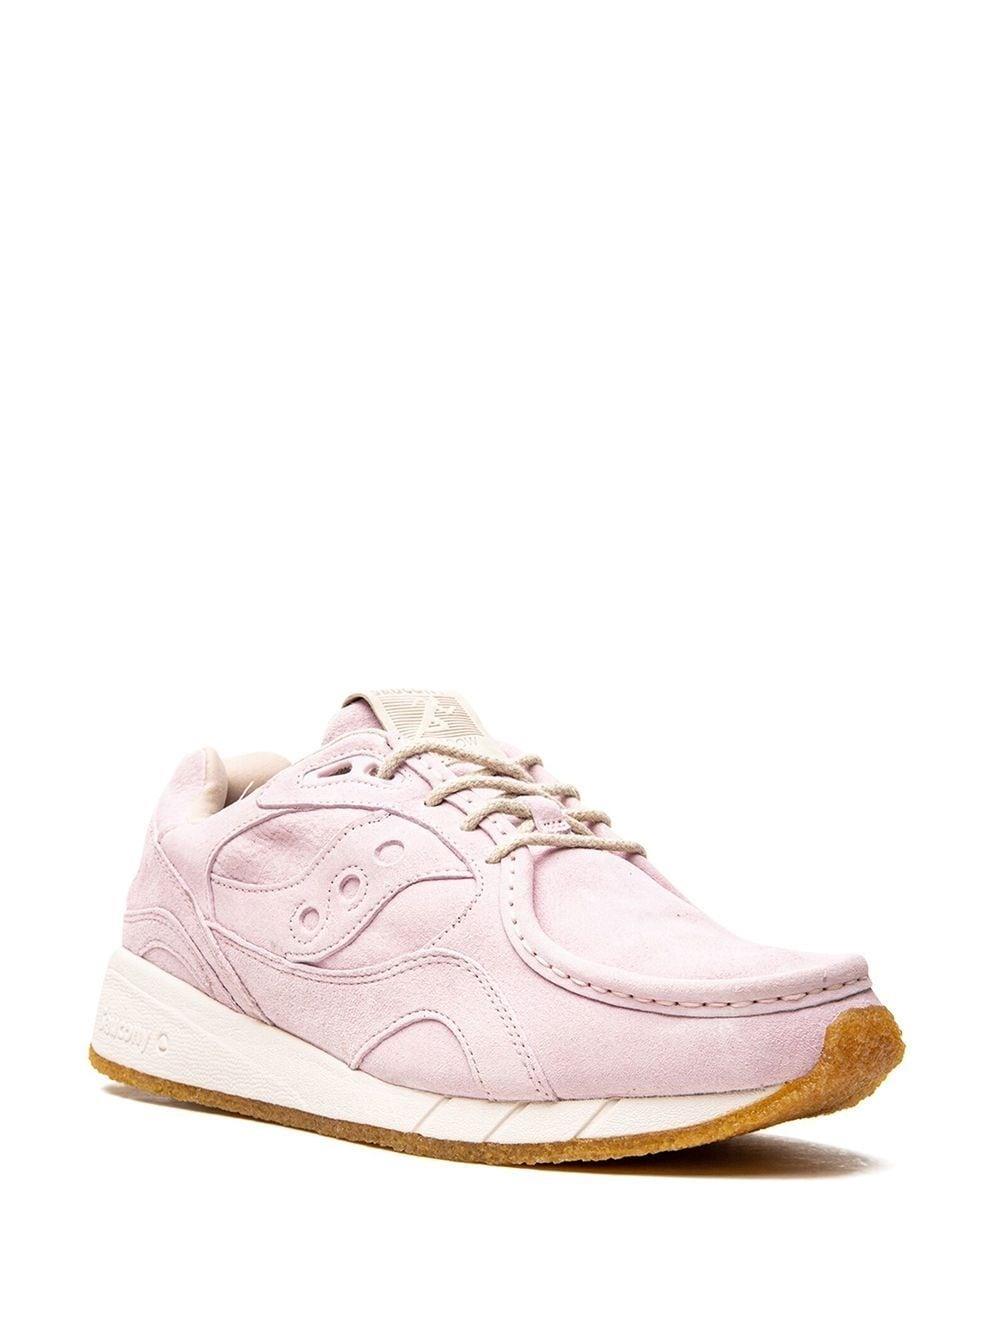 Saucony Shadow 6000 MOC "Aw22" sneakers - Pink